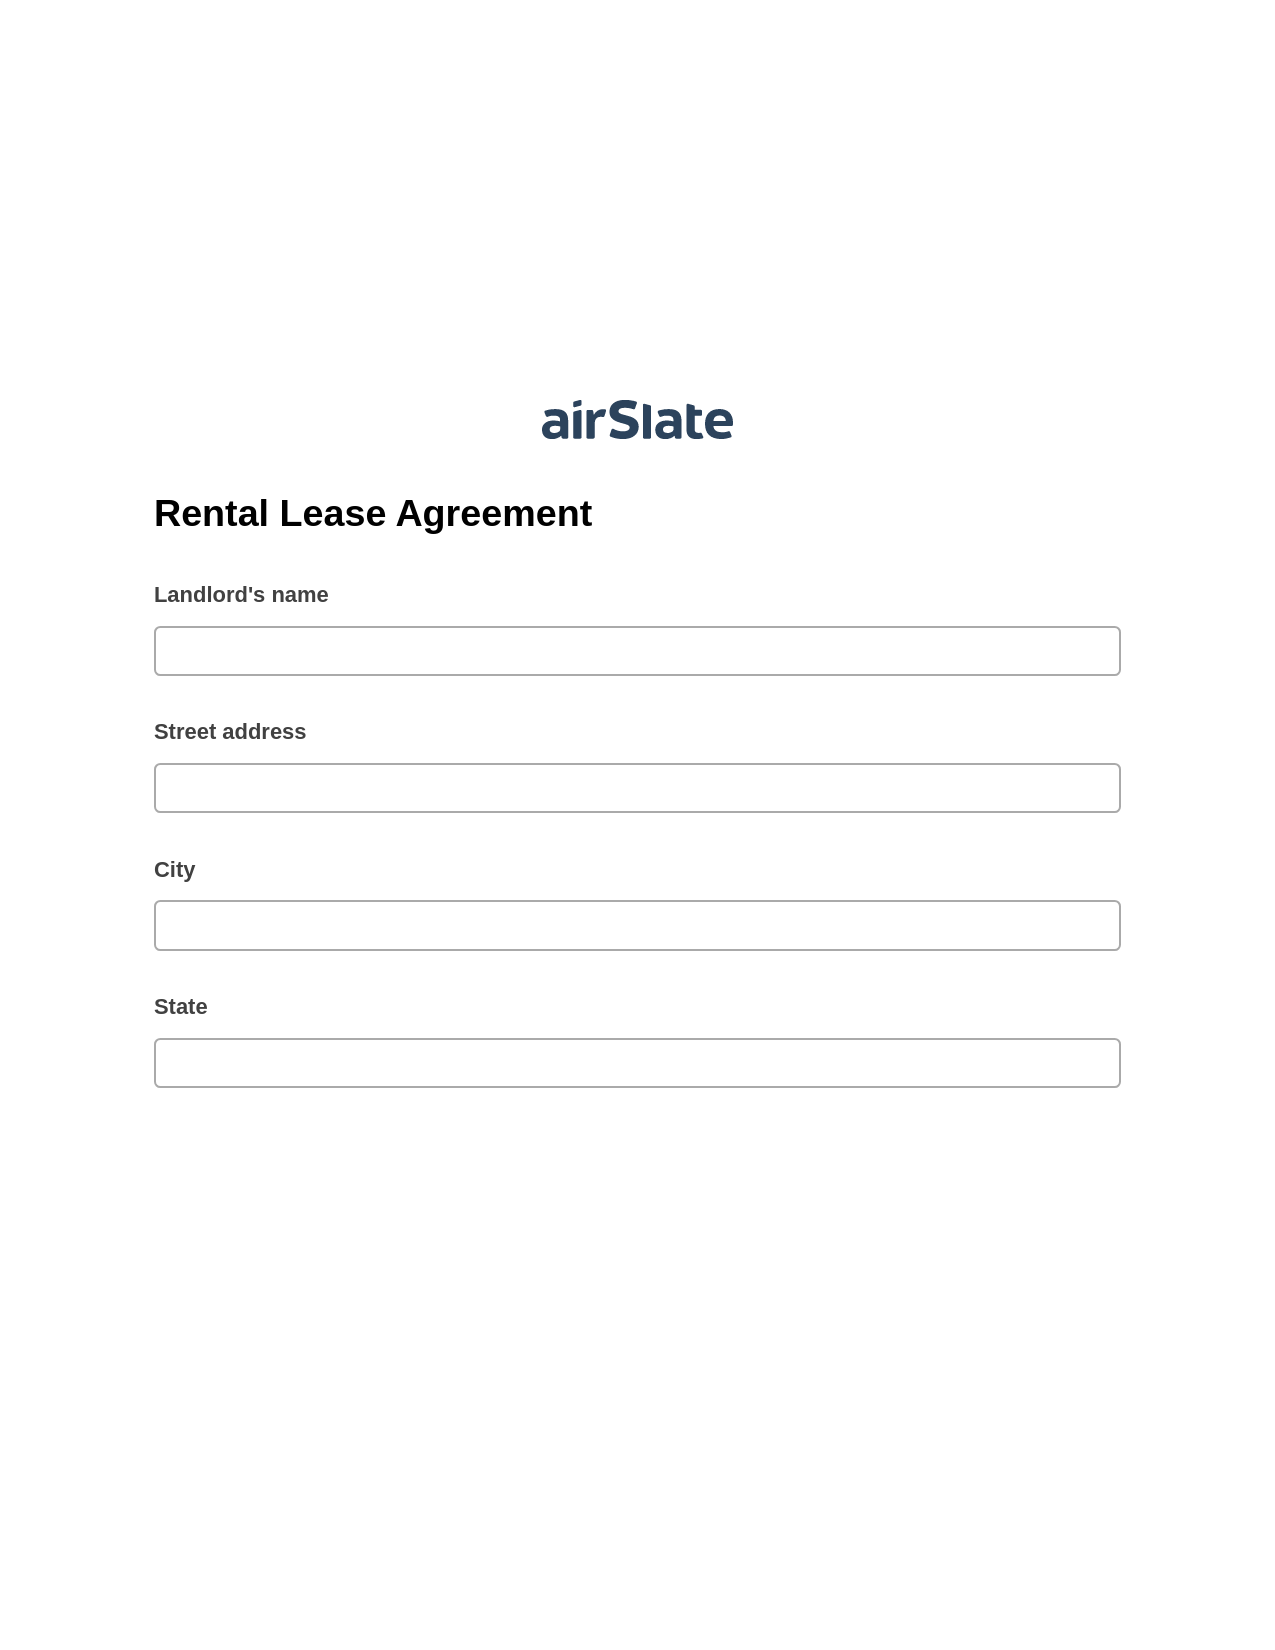 Rental Lease Agreement Pre-fill Dropdown from Airtable, Create Slate every Google Sheet Update Bot, Export to Excel 365 Bot